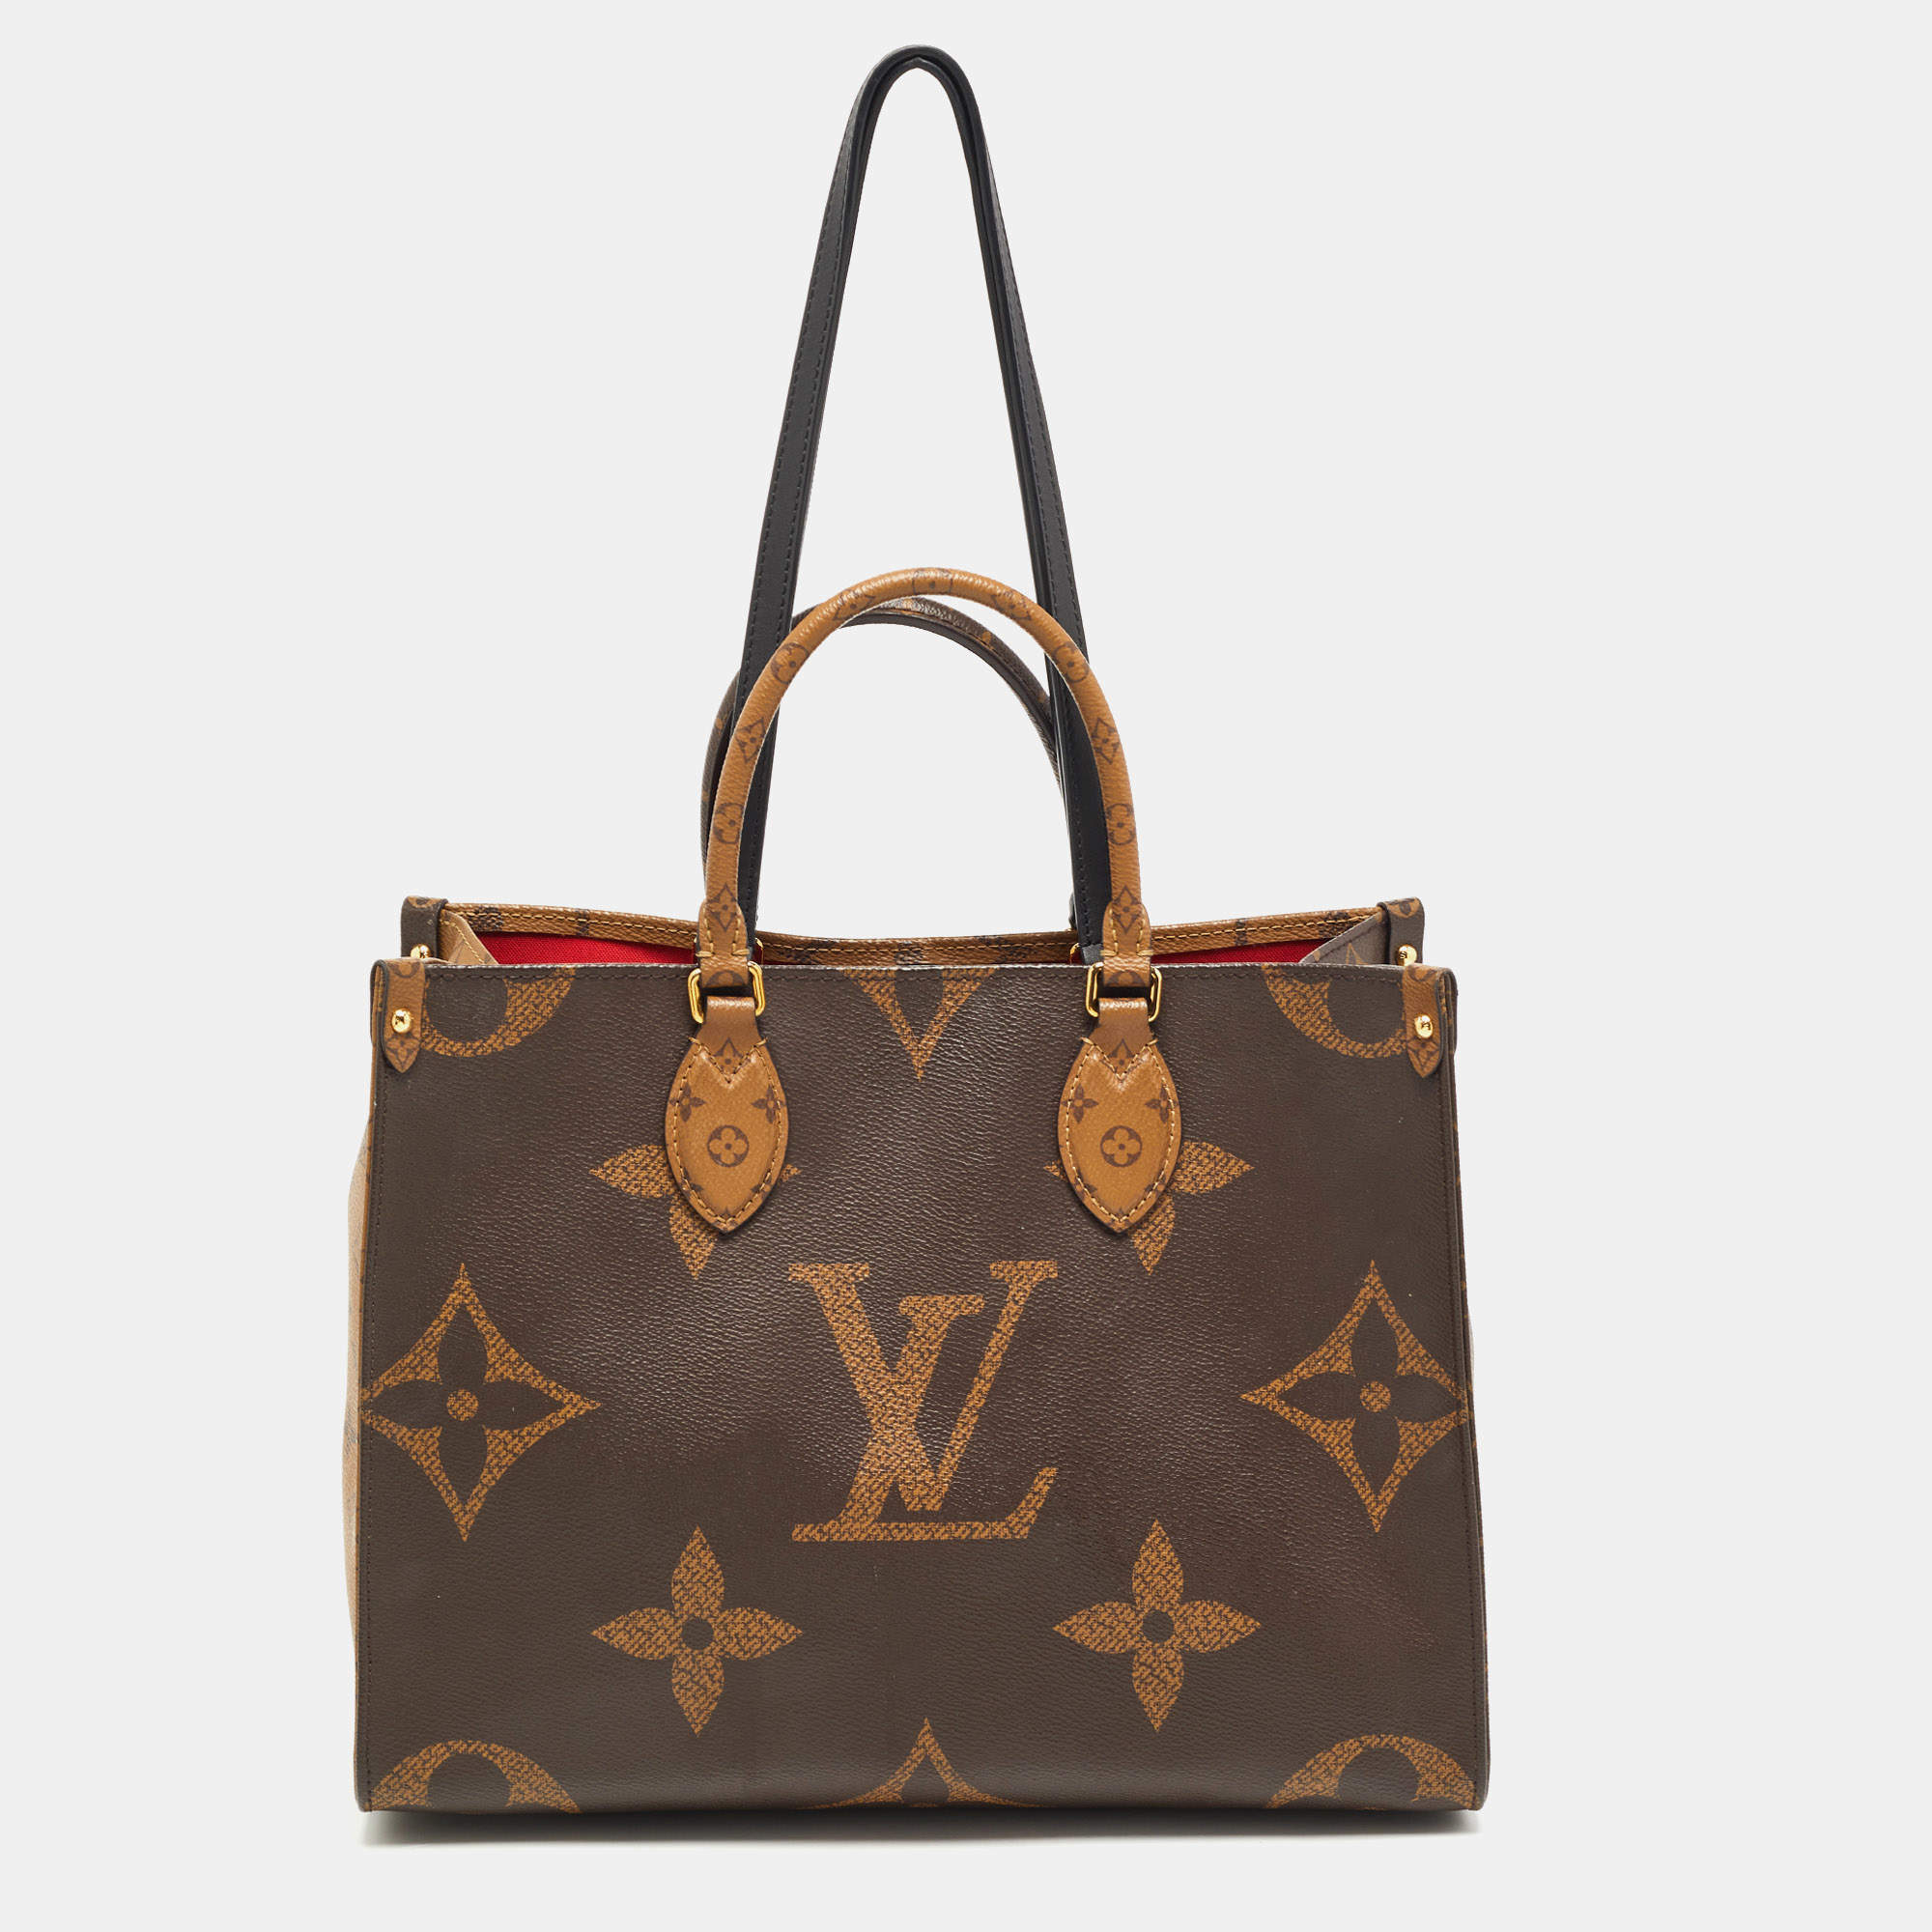 Lv Bags Collection 2020 Ford